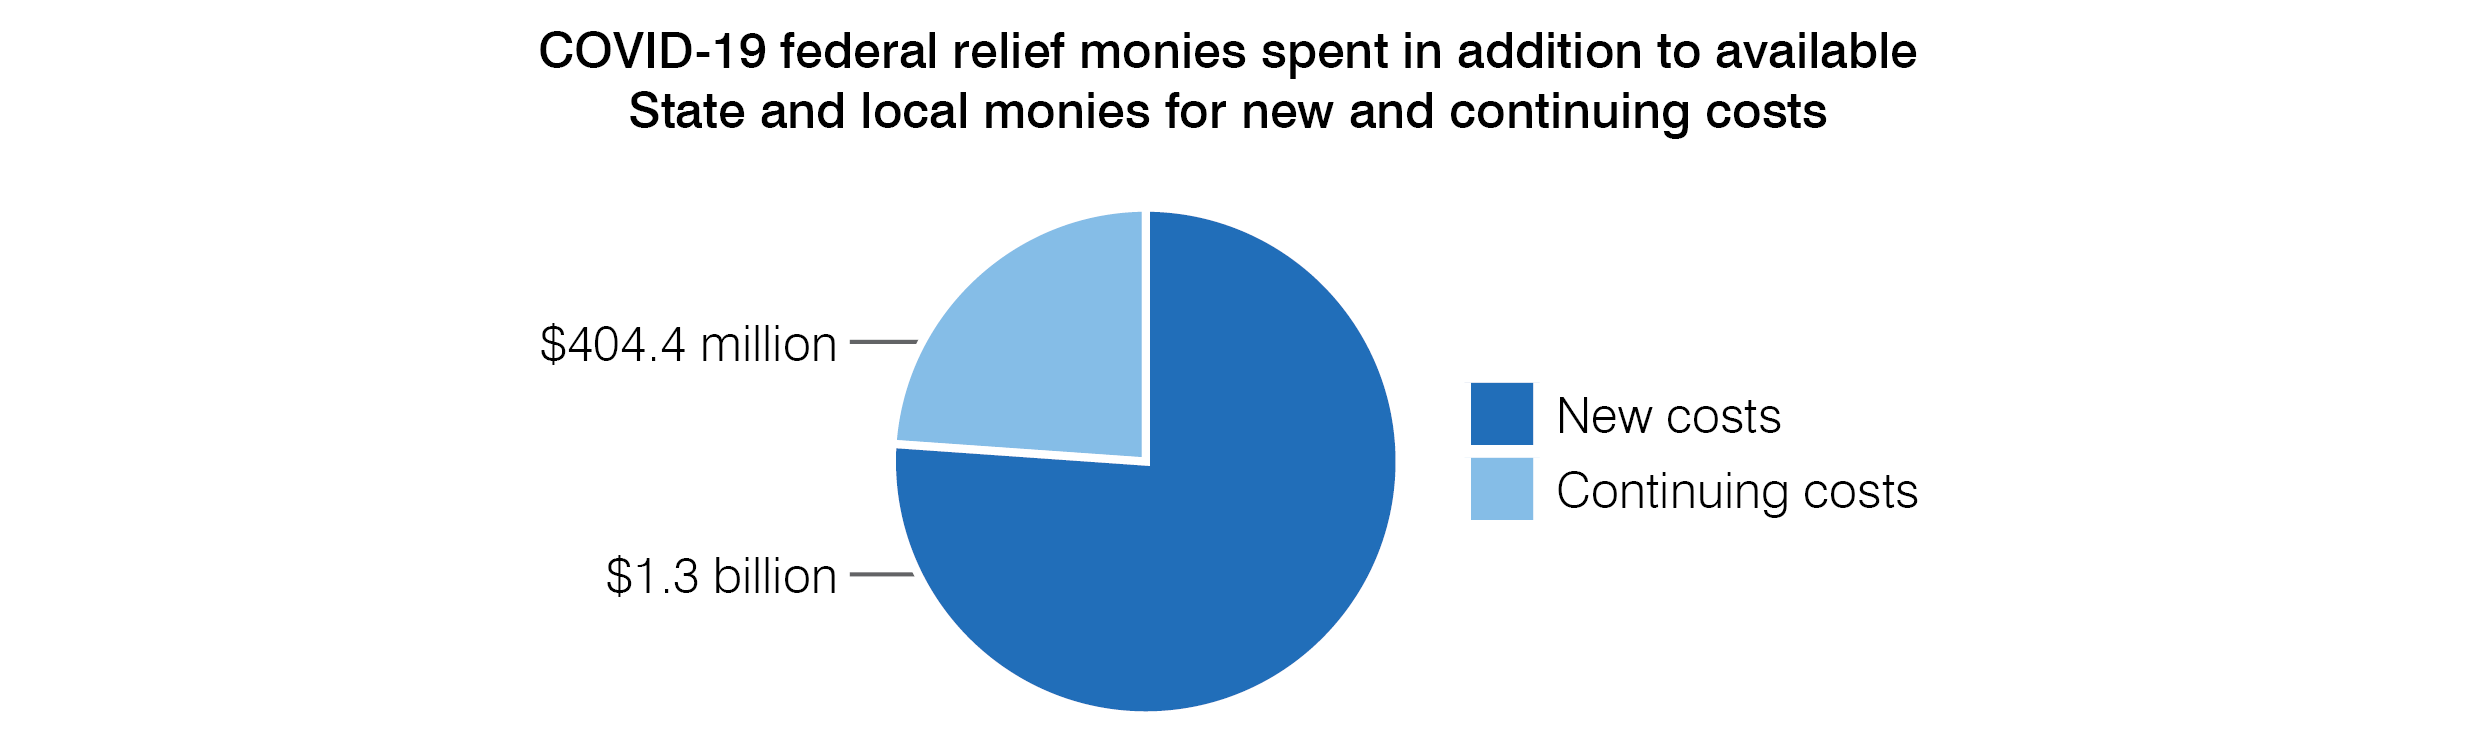 Pie Chart (COVID-19 federal relief monies spent in addition to available State and local monies for new and continuing costs)